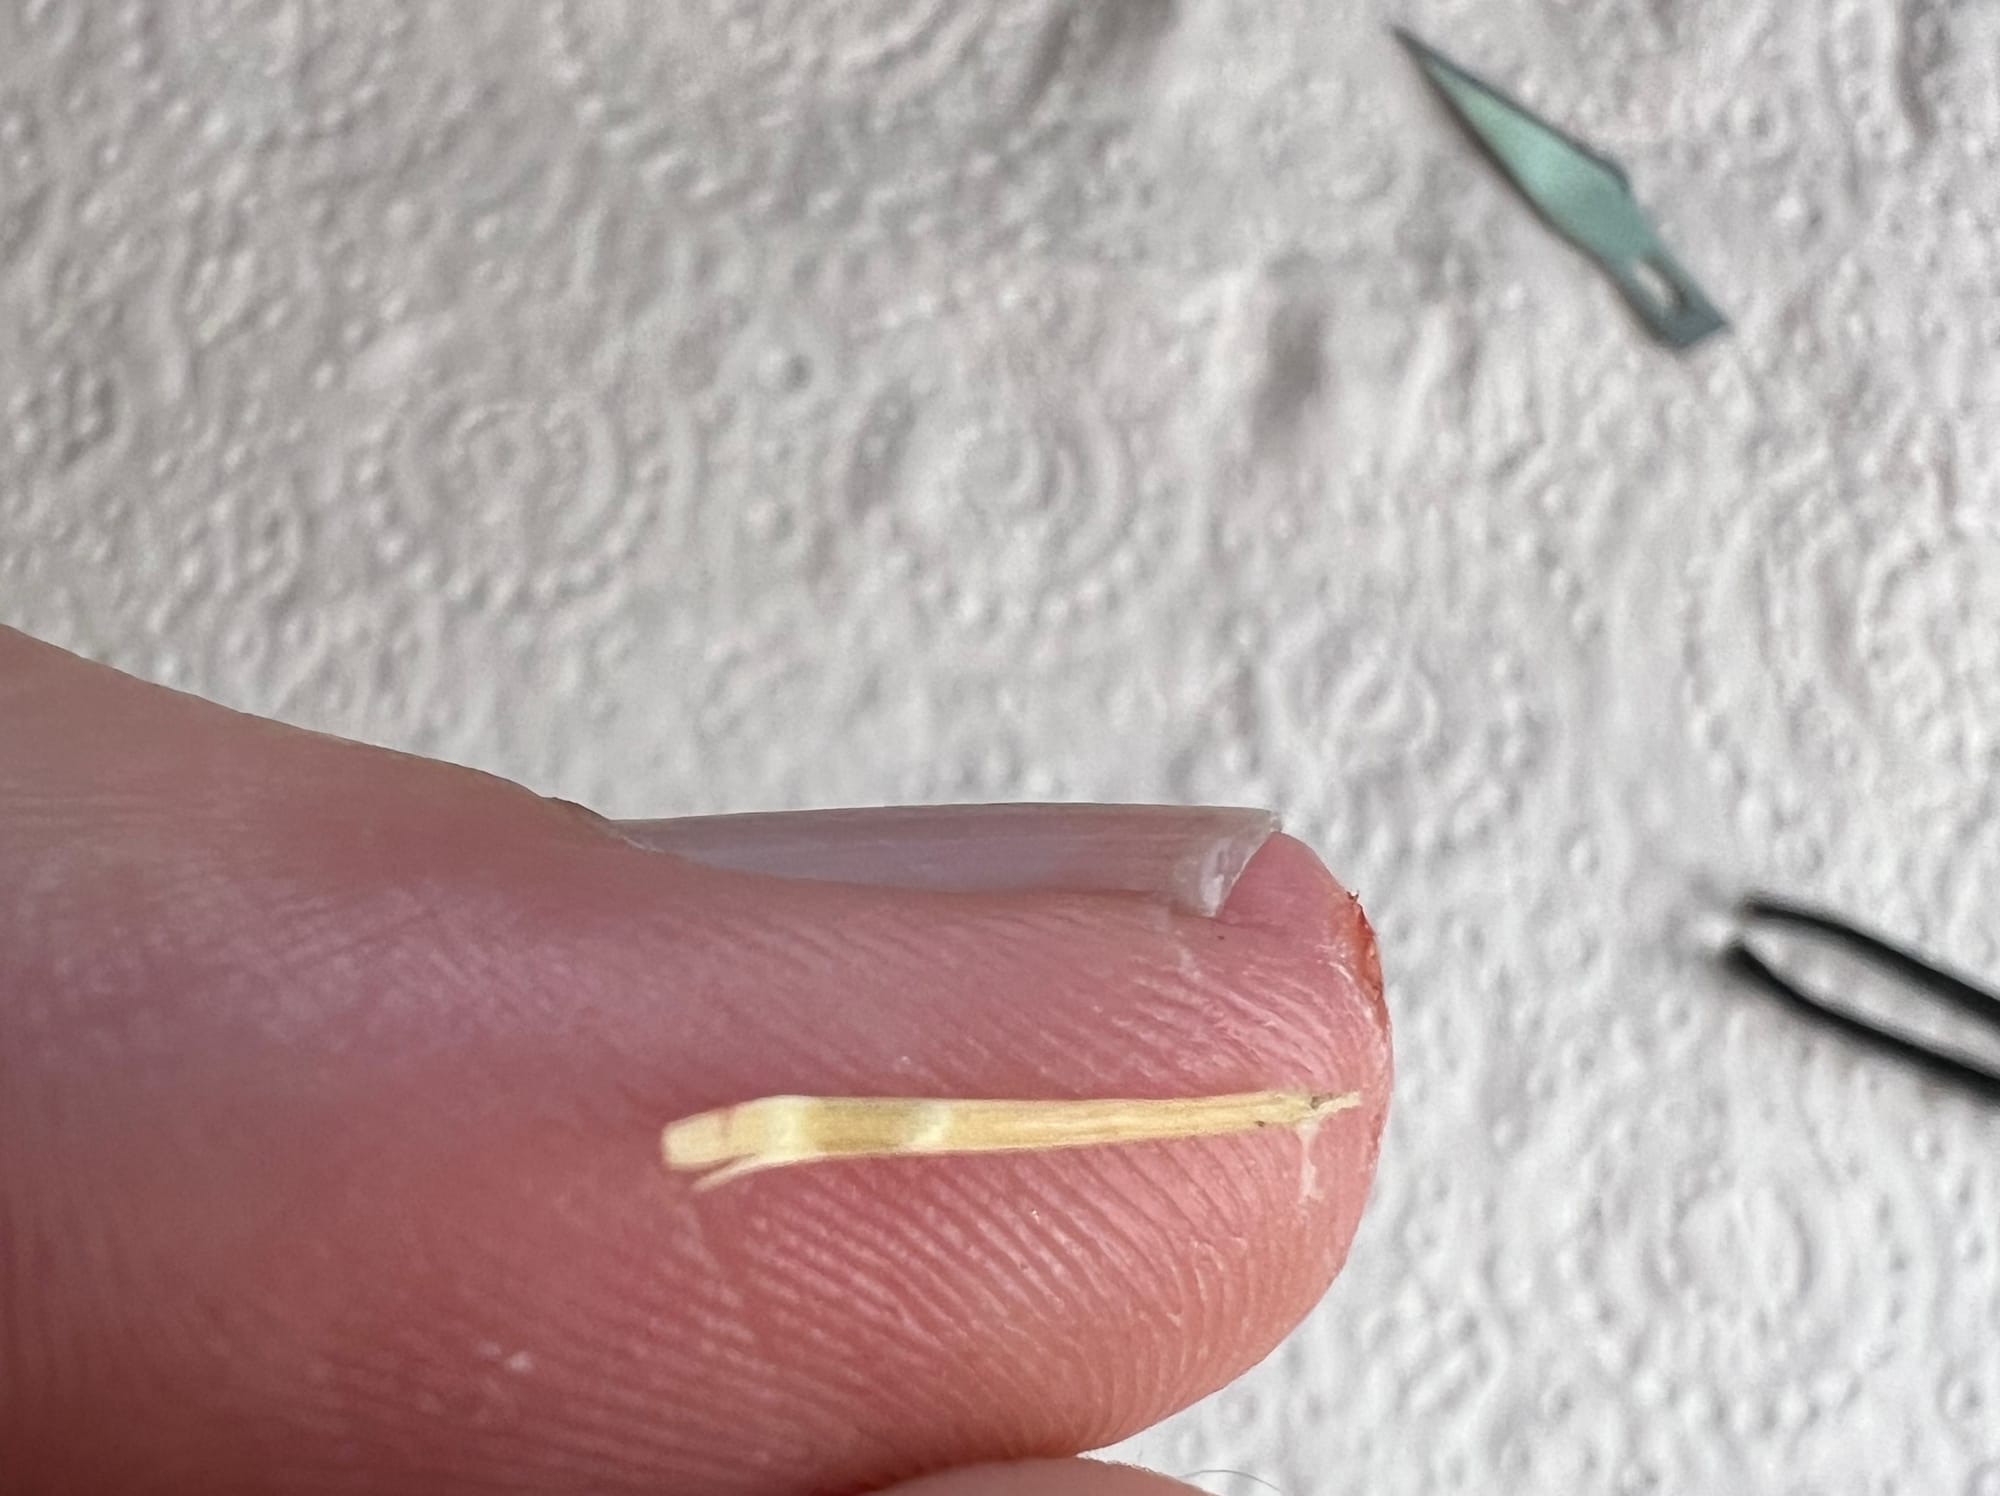 A picture of a splinter I pulled out of my thumb against my thumb, with the tools I used in the background.